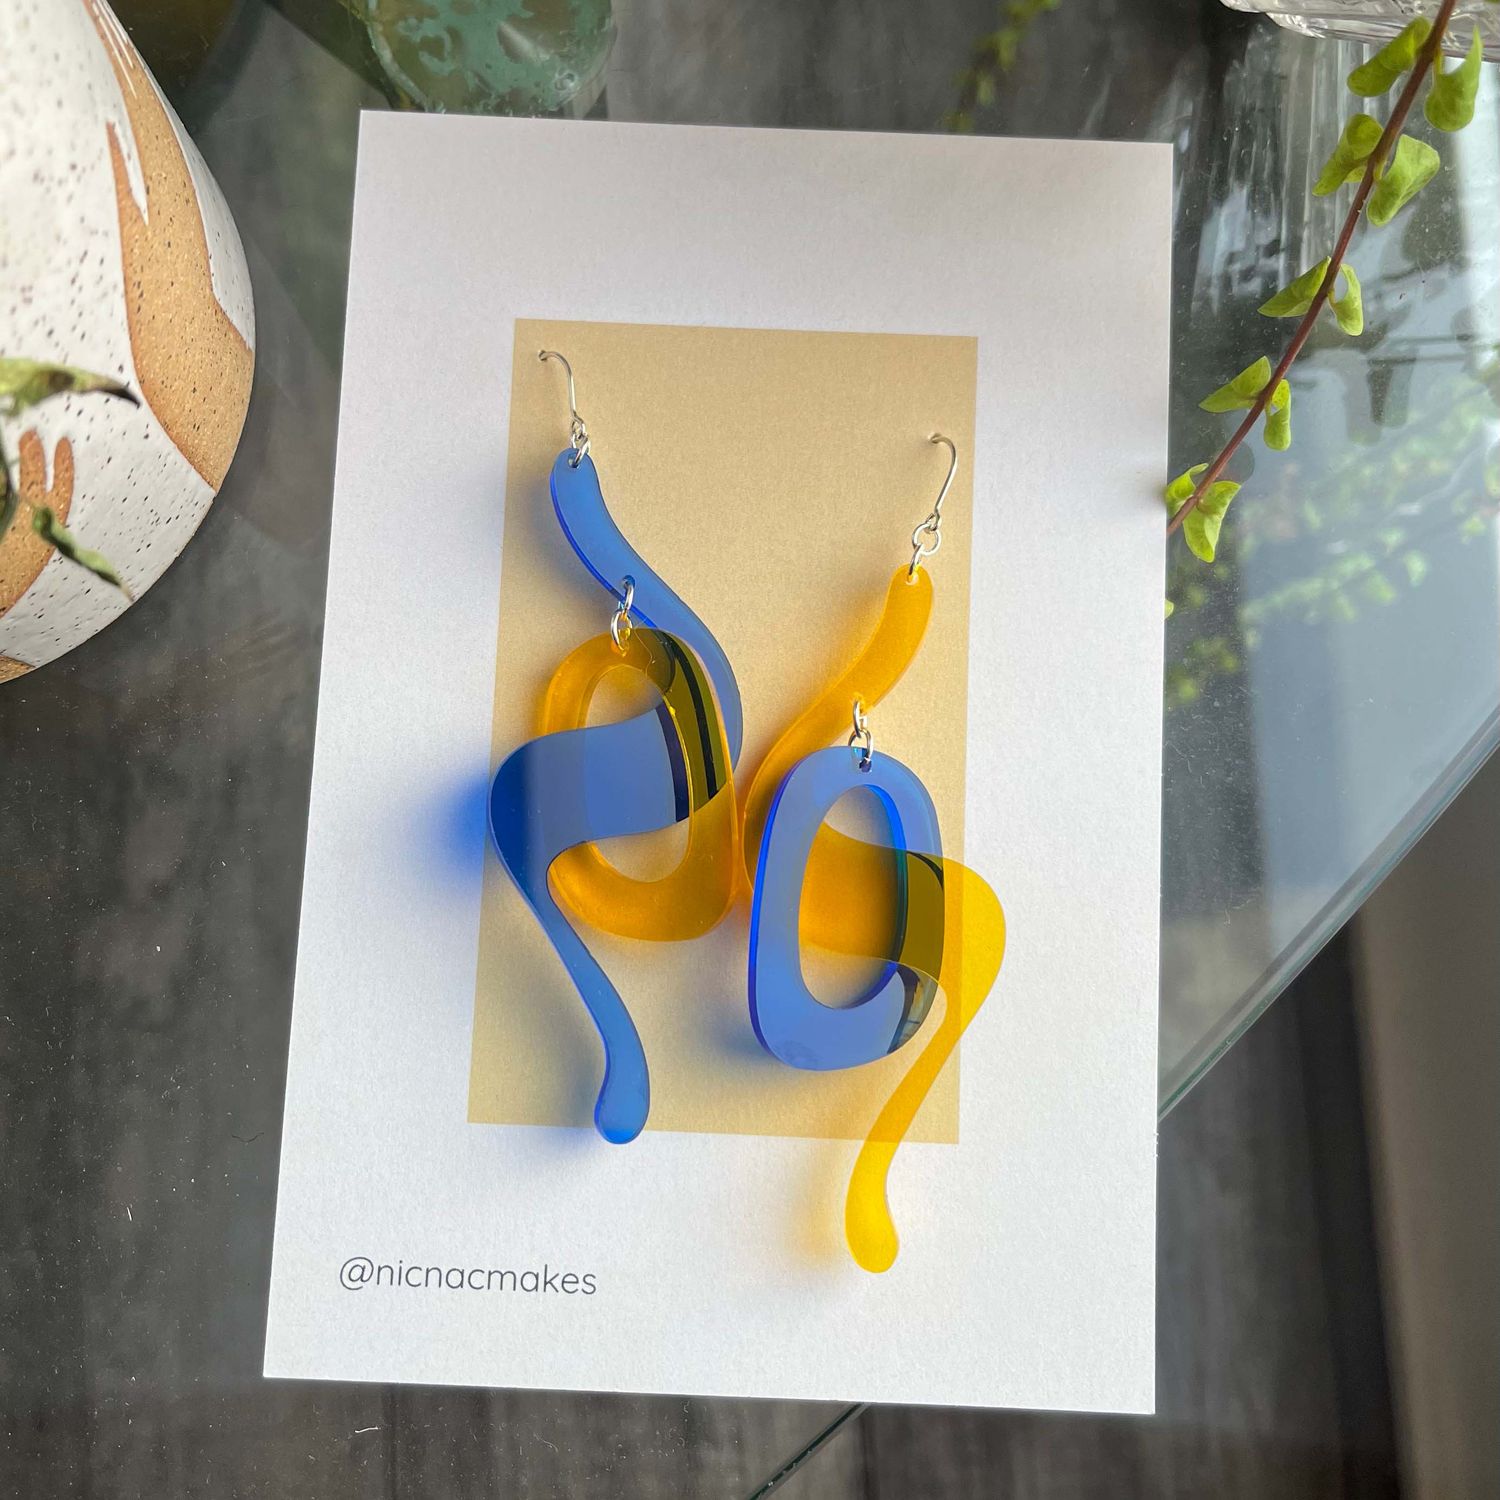 Nicnac: Weaver Earrings in Yellow and Blue Product Image 1 of 2